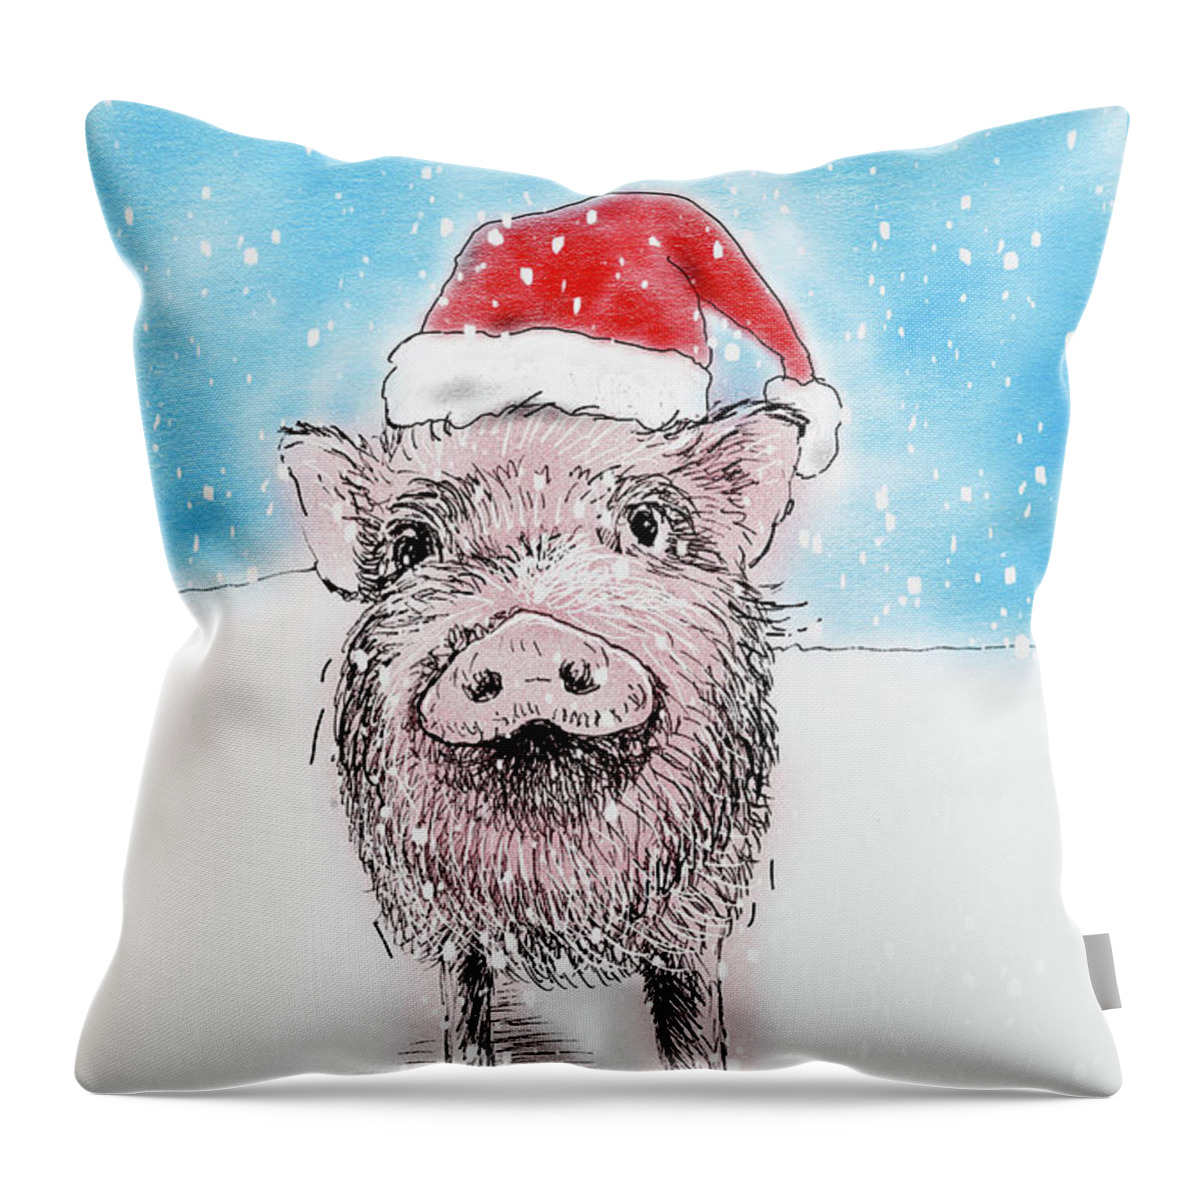 Happy Holidays Throw Pillow featuring the mixed media Santa Piggy by AnneMarie Welsh